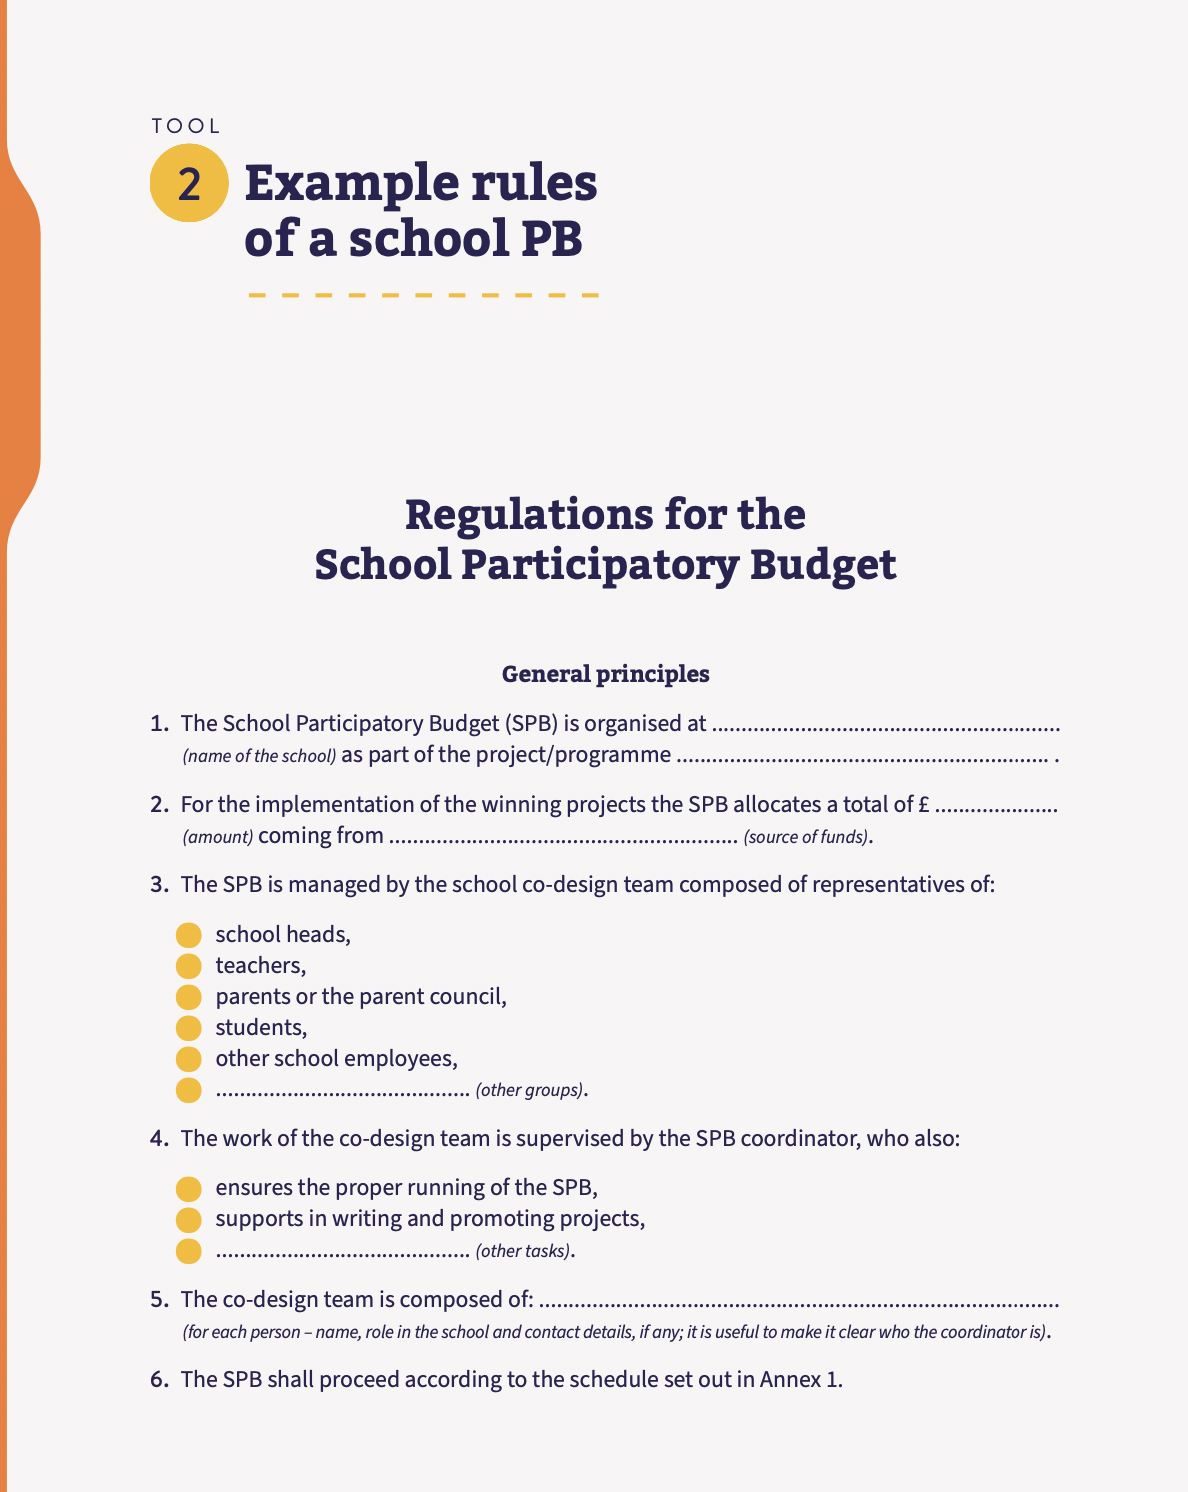 Tool 2: Example rules of a school PB